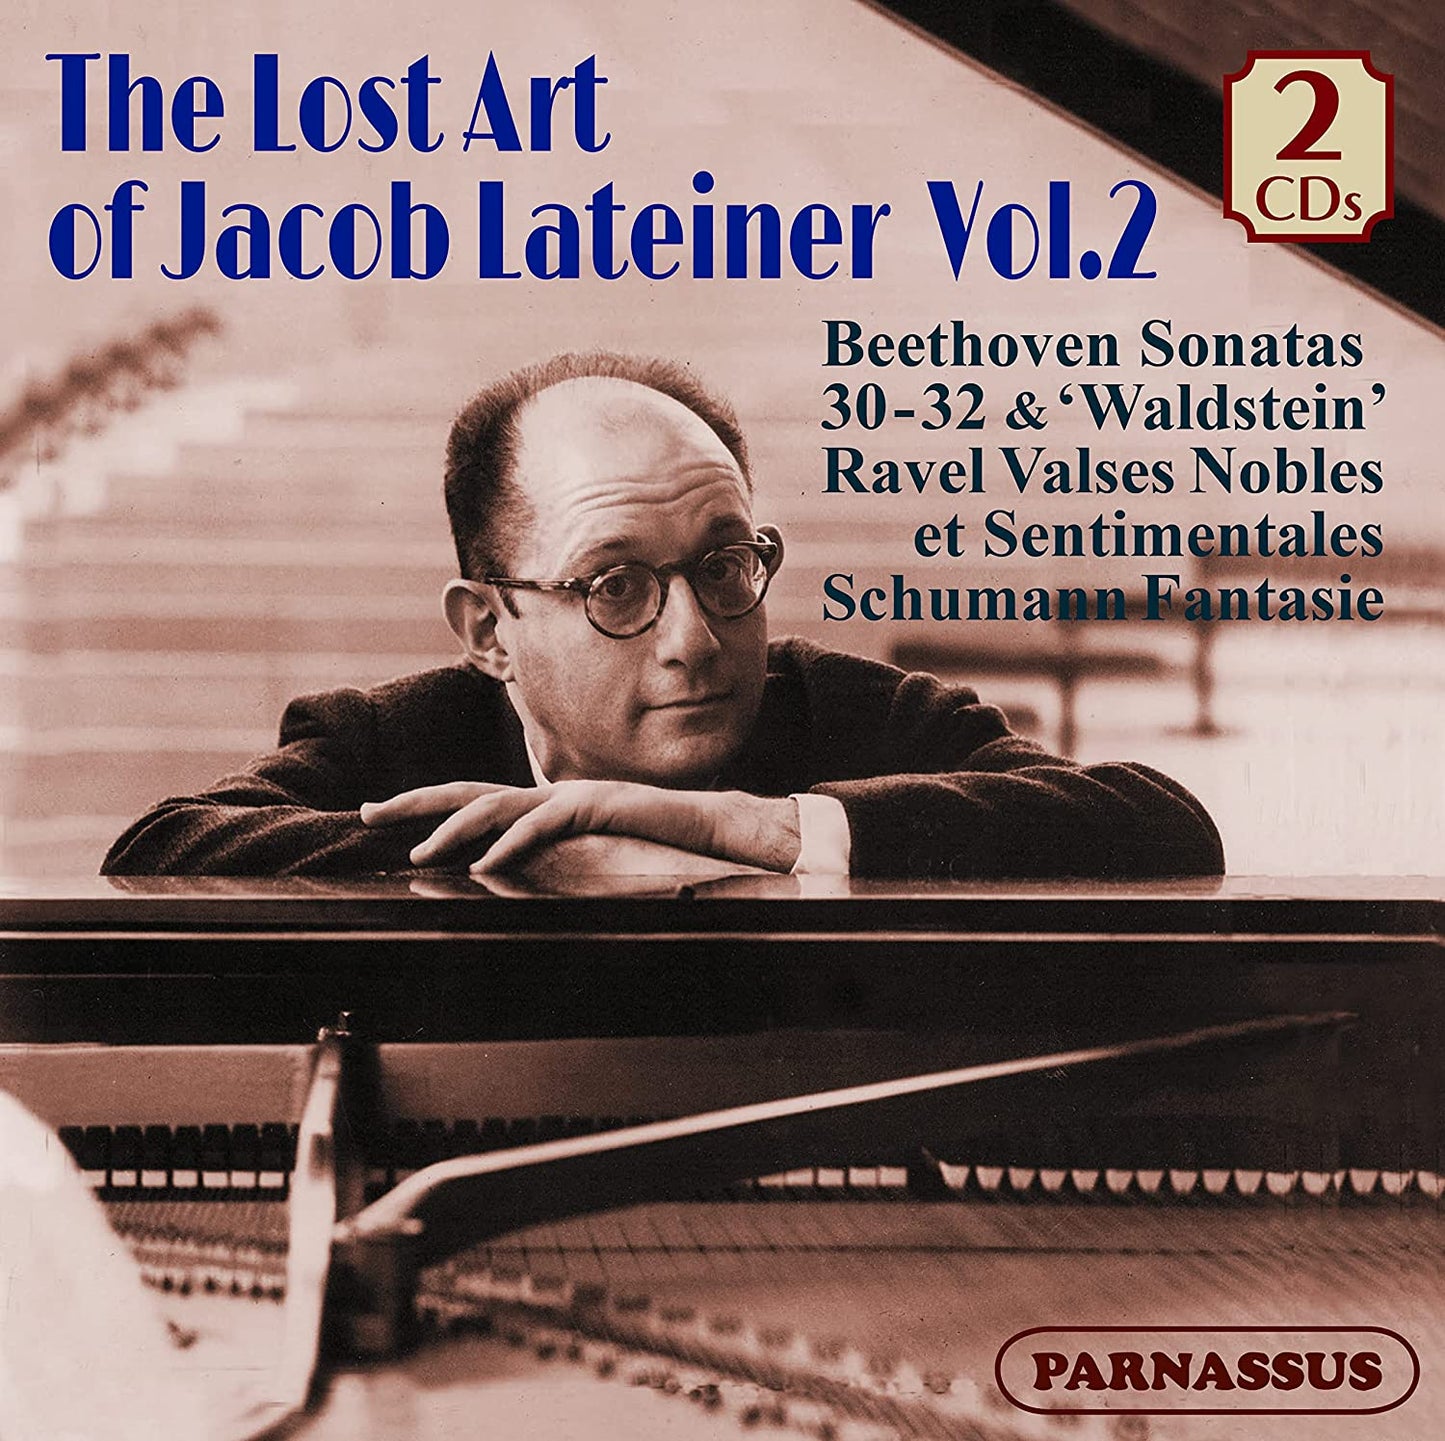 The Lost Art of Jacob Lateiner, Volume 2 (2 CDs WITH FREE MP3 DIGITAL DOWNLOAD)